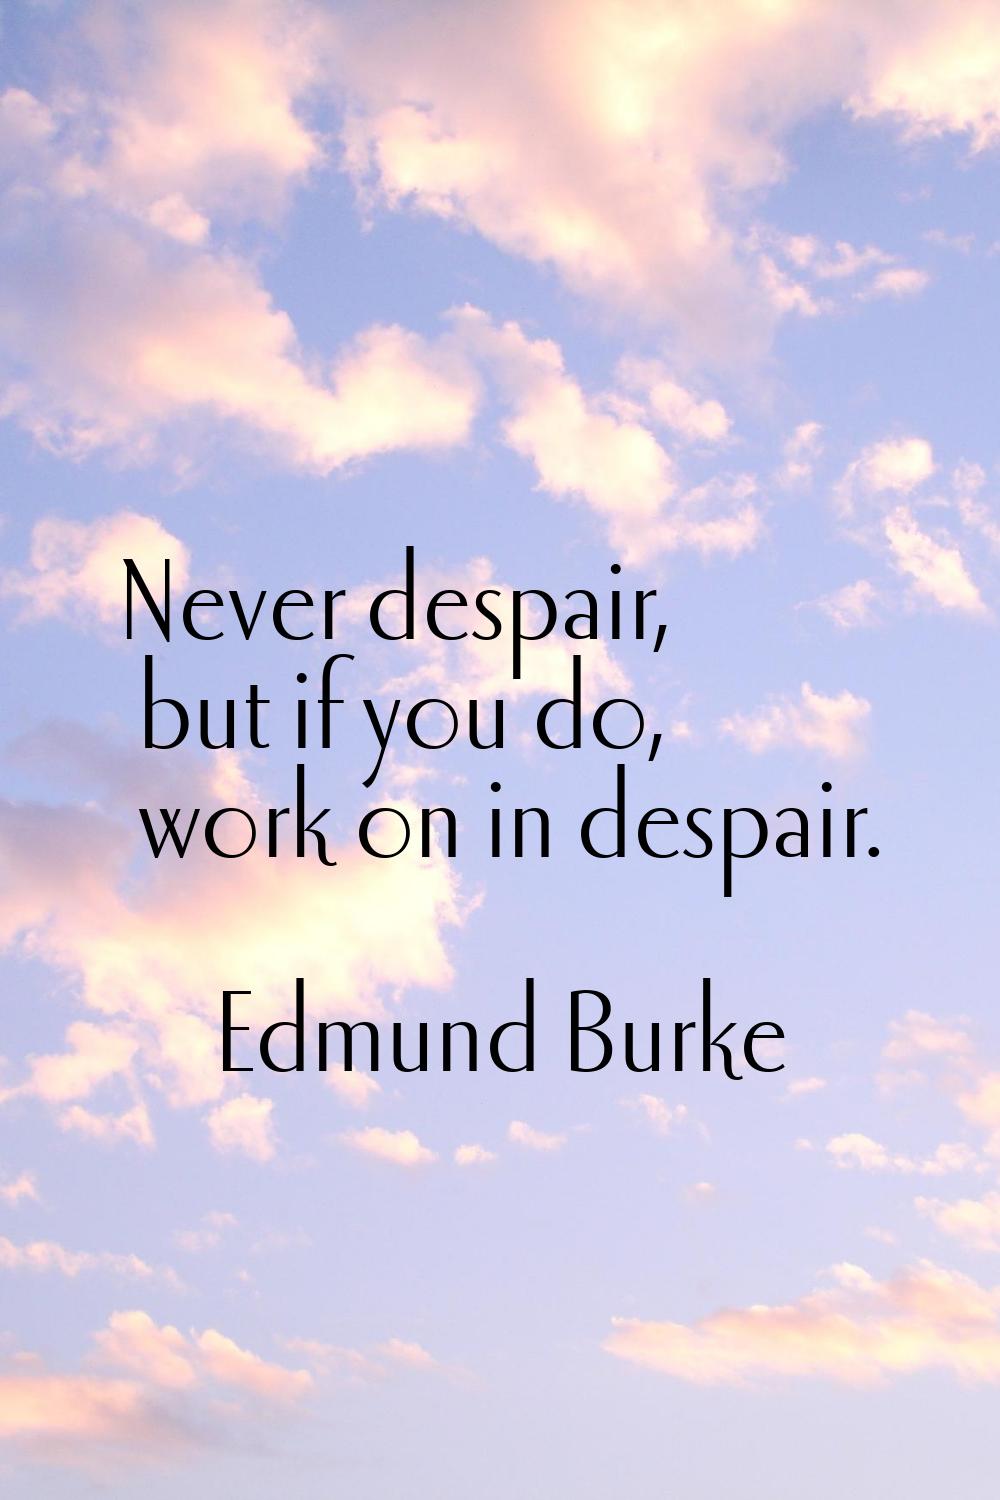 Never despair, but if you do, work on in despair.